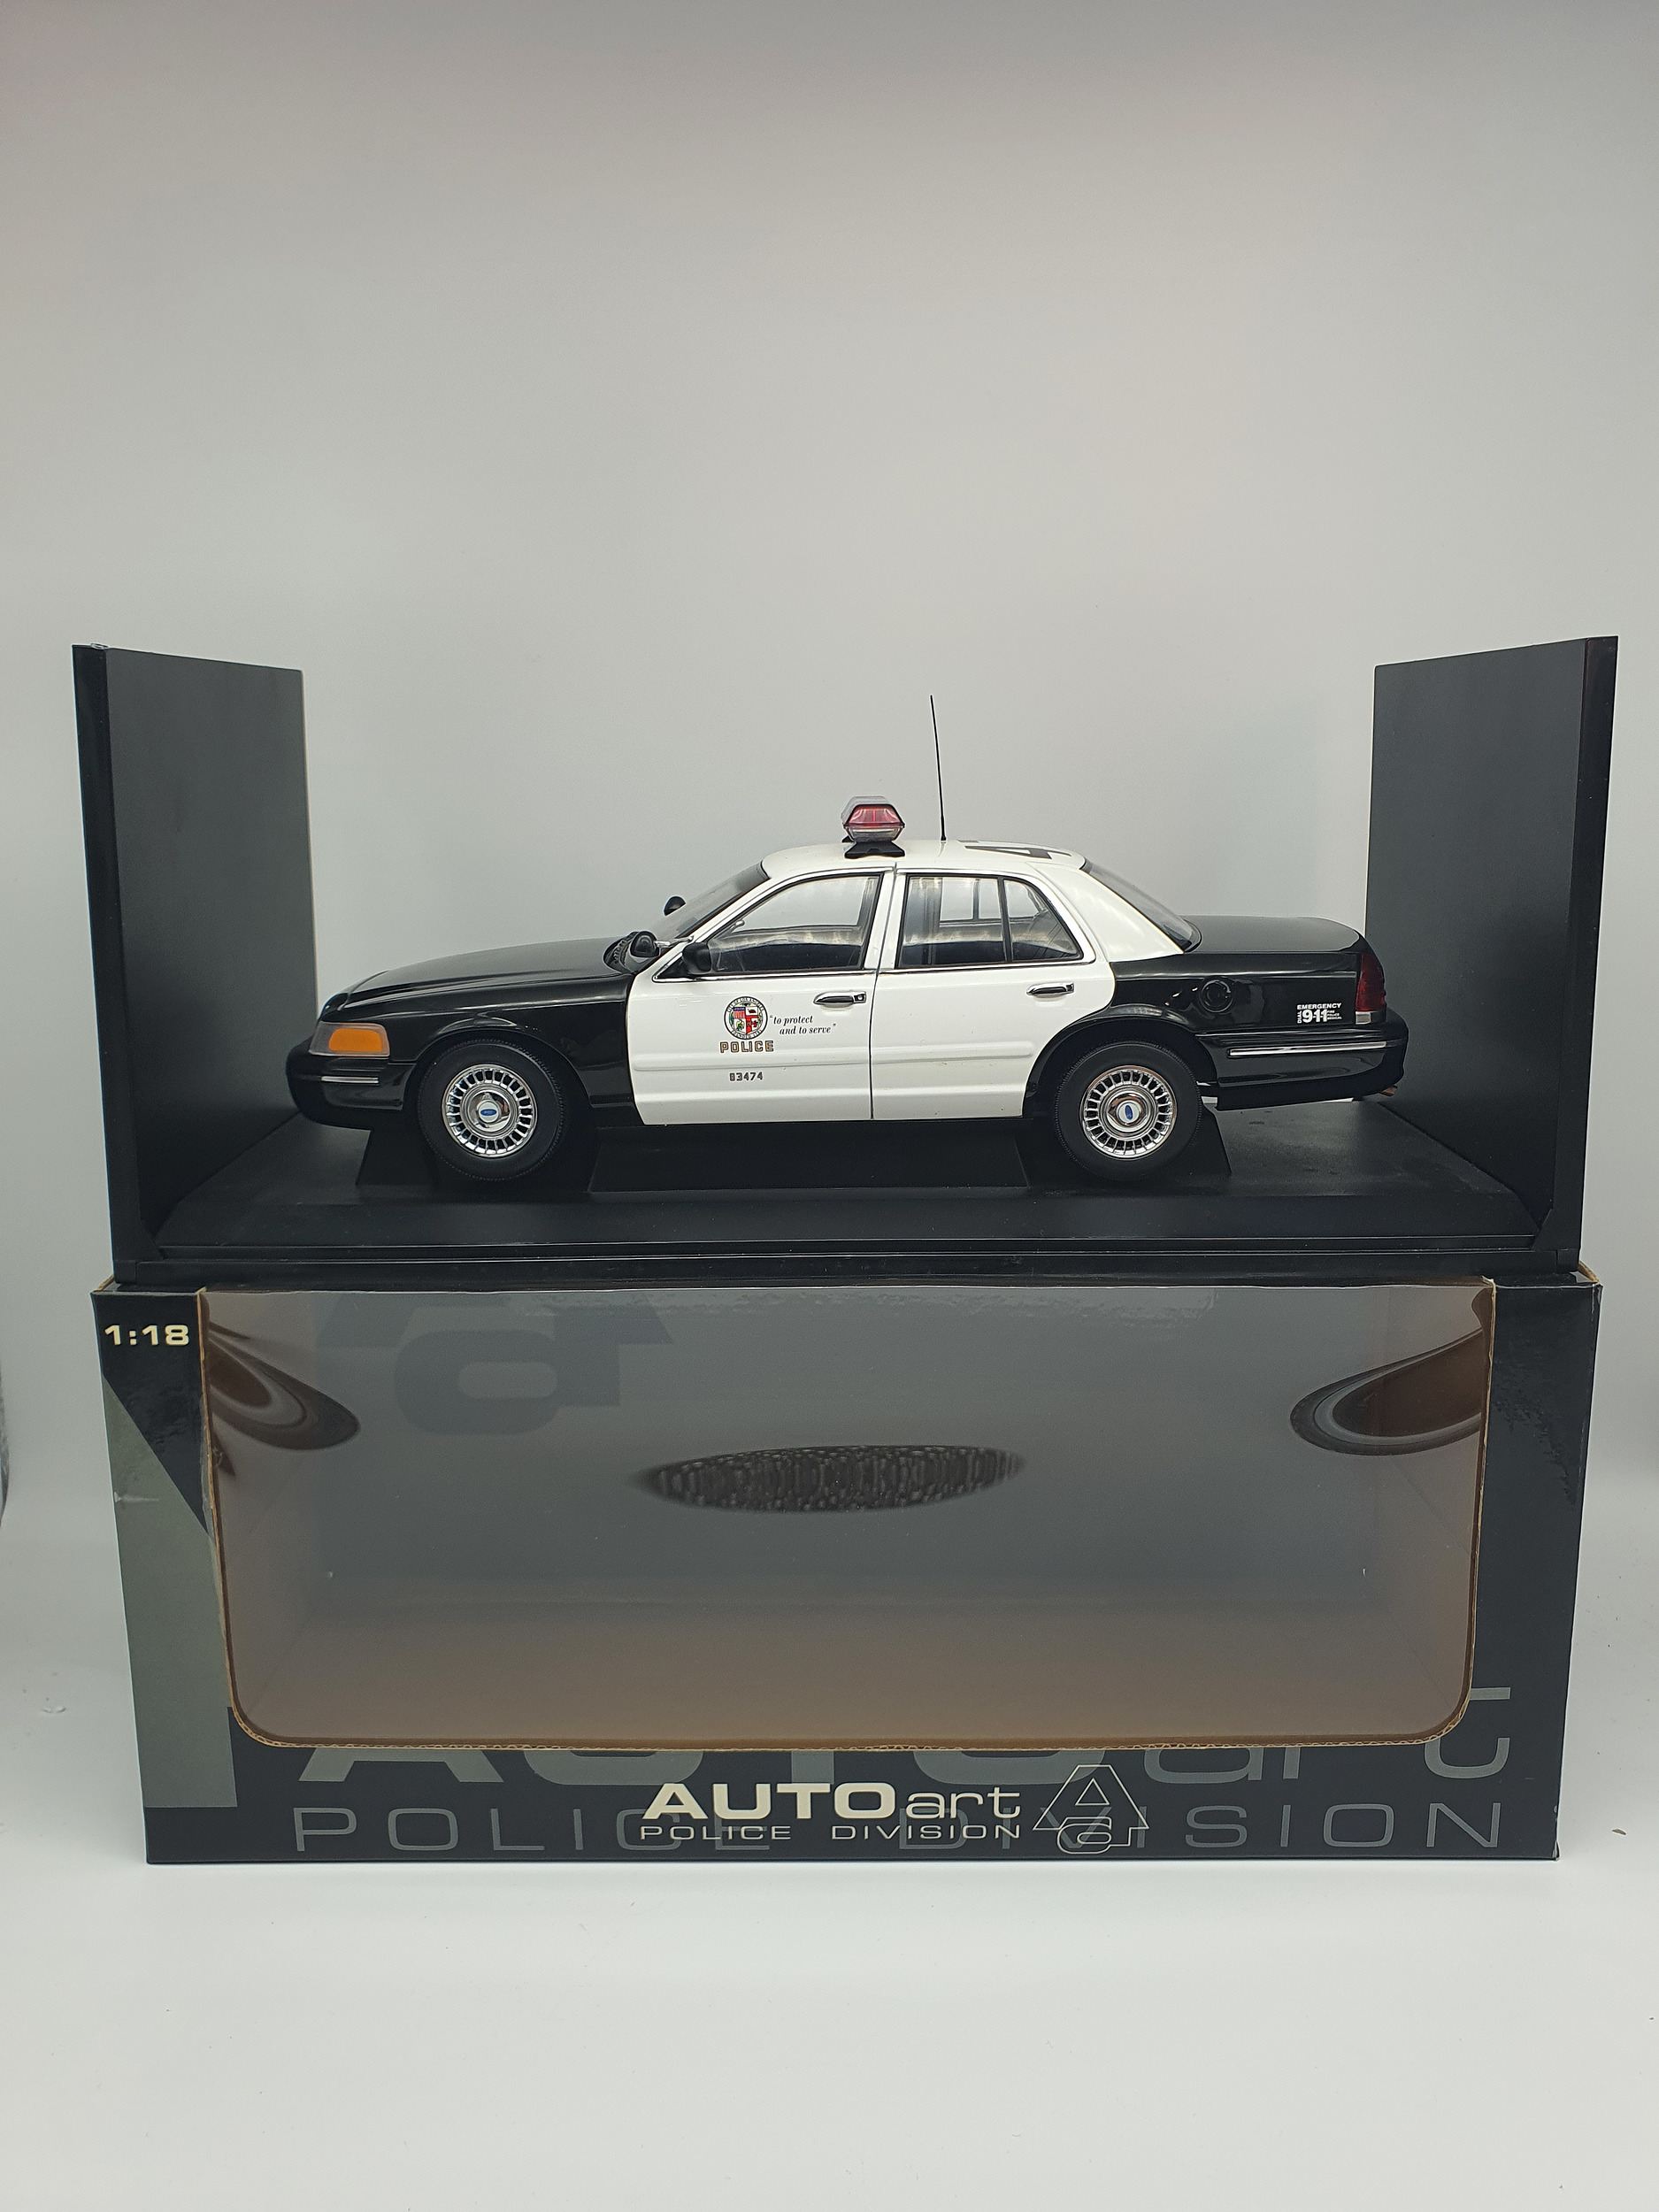 AutoArt Police Division Ford Crown - Lot 1145132 | ALLBIDS